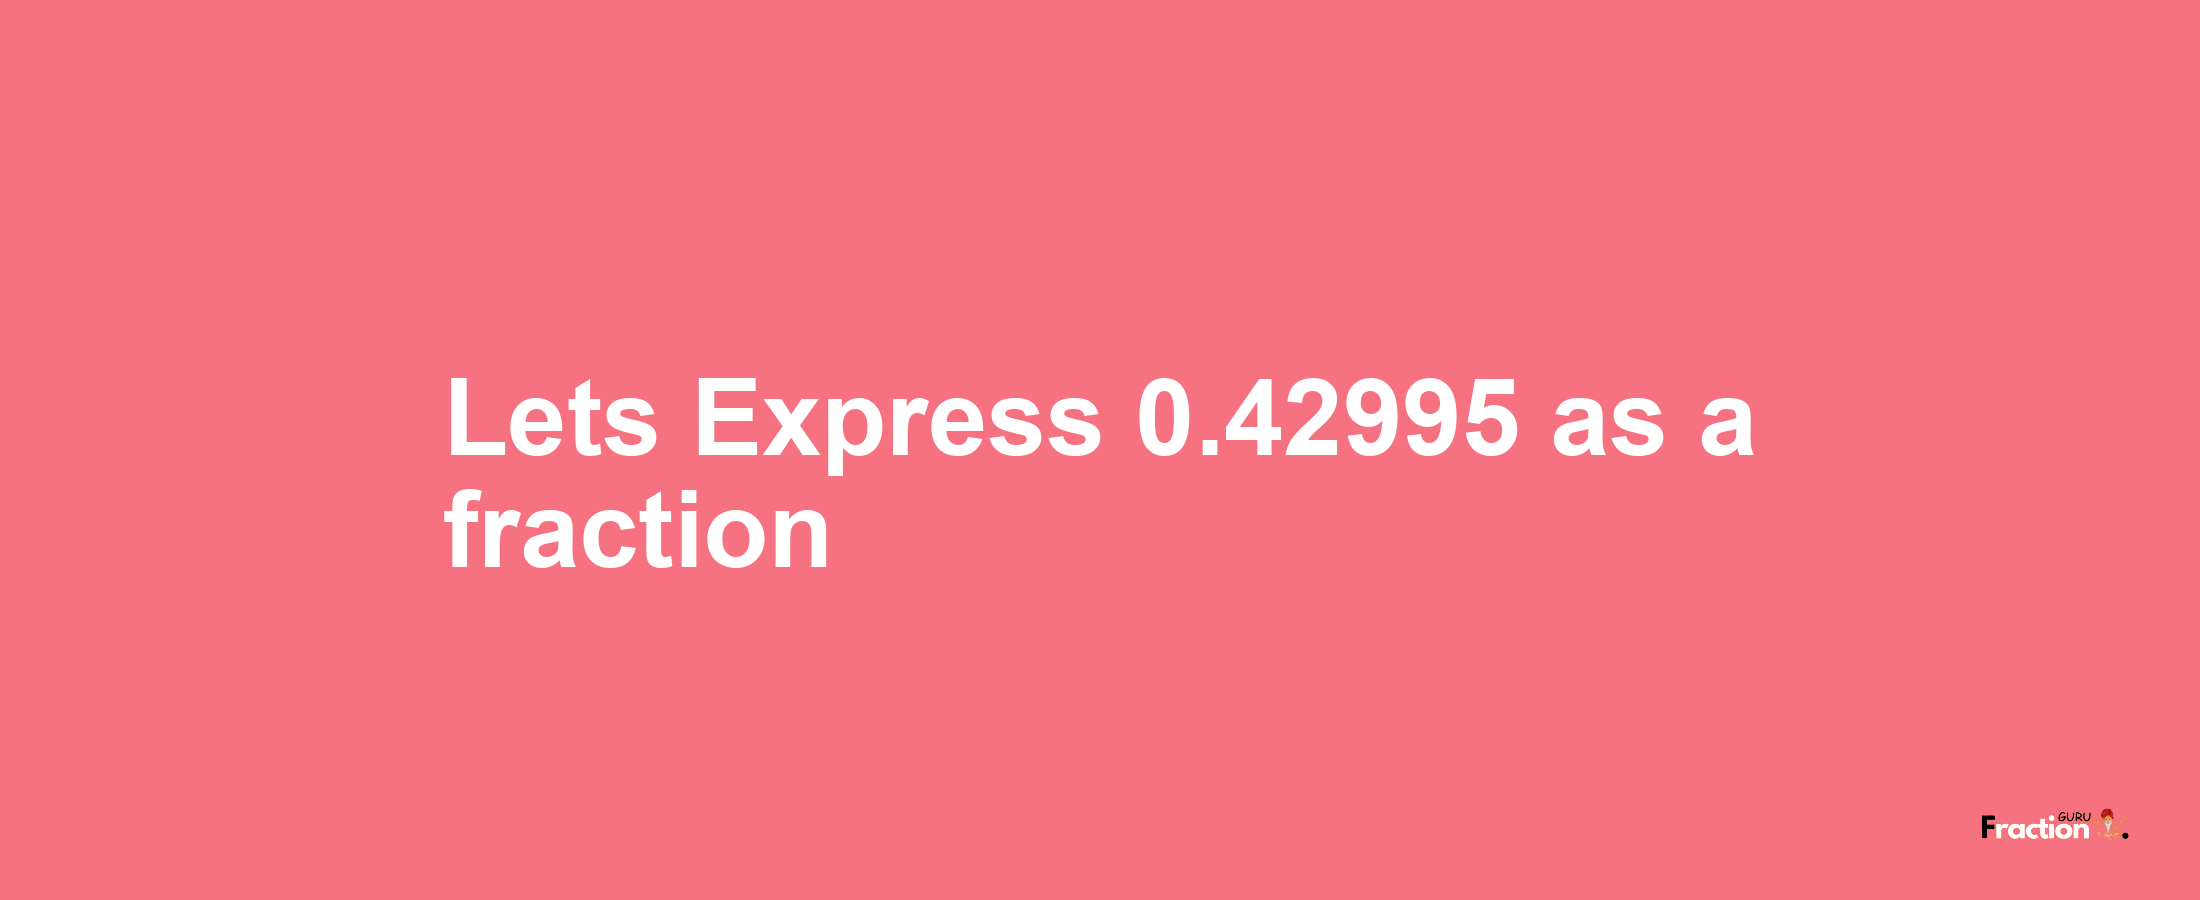 Lets Express 0.42995 as afraction